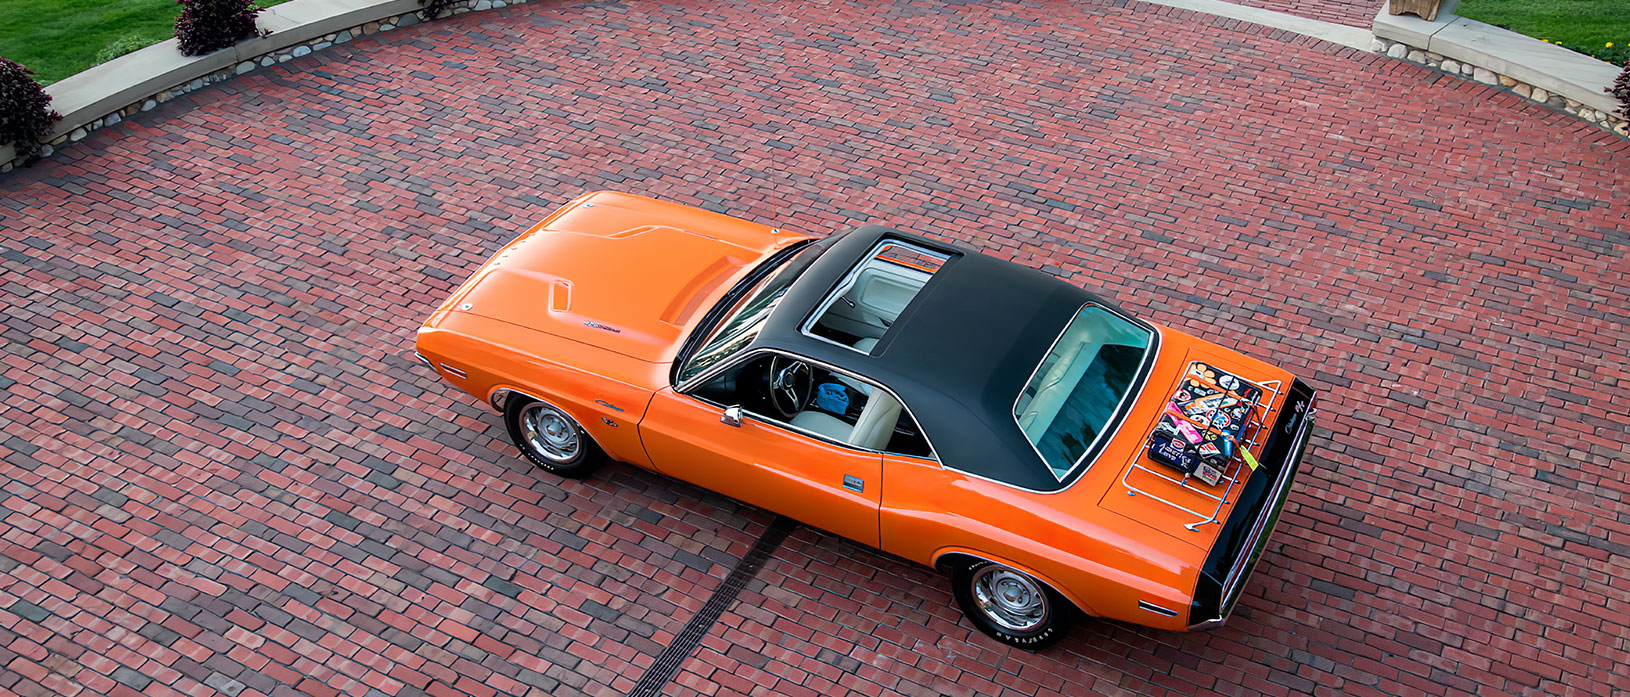 Orange 1970 Dodge Challenger with black top and sunroof